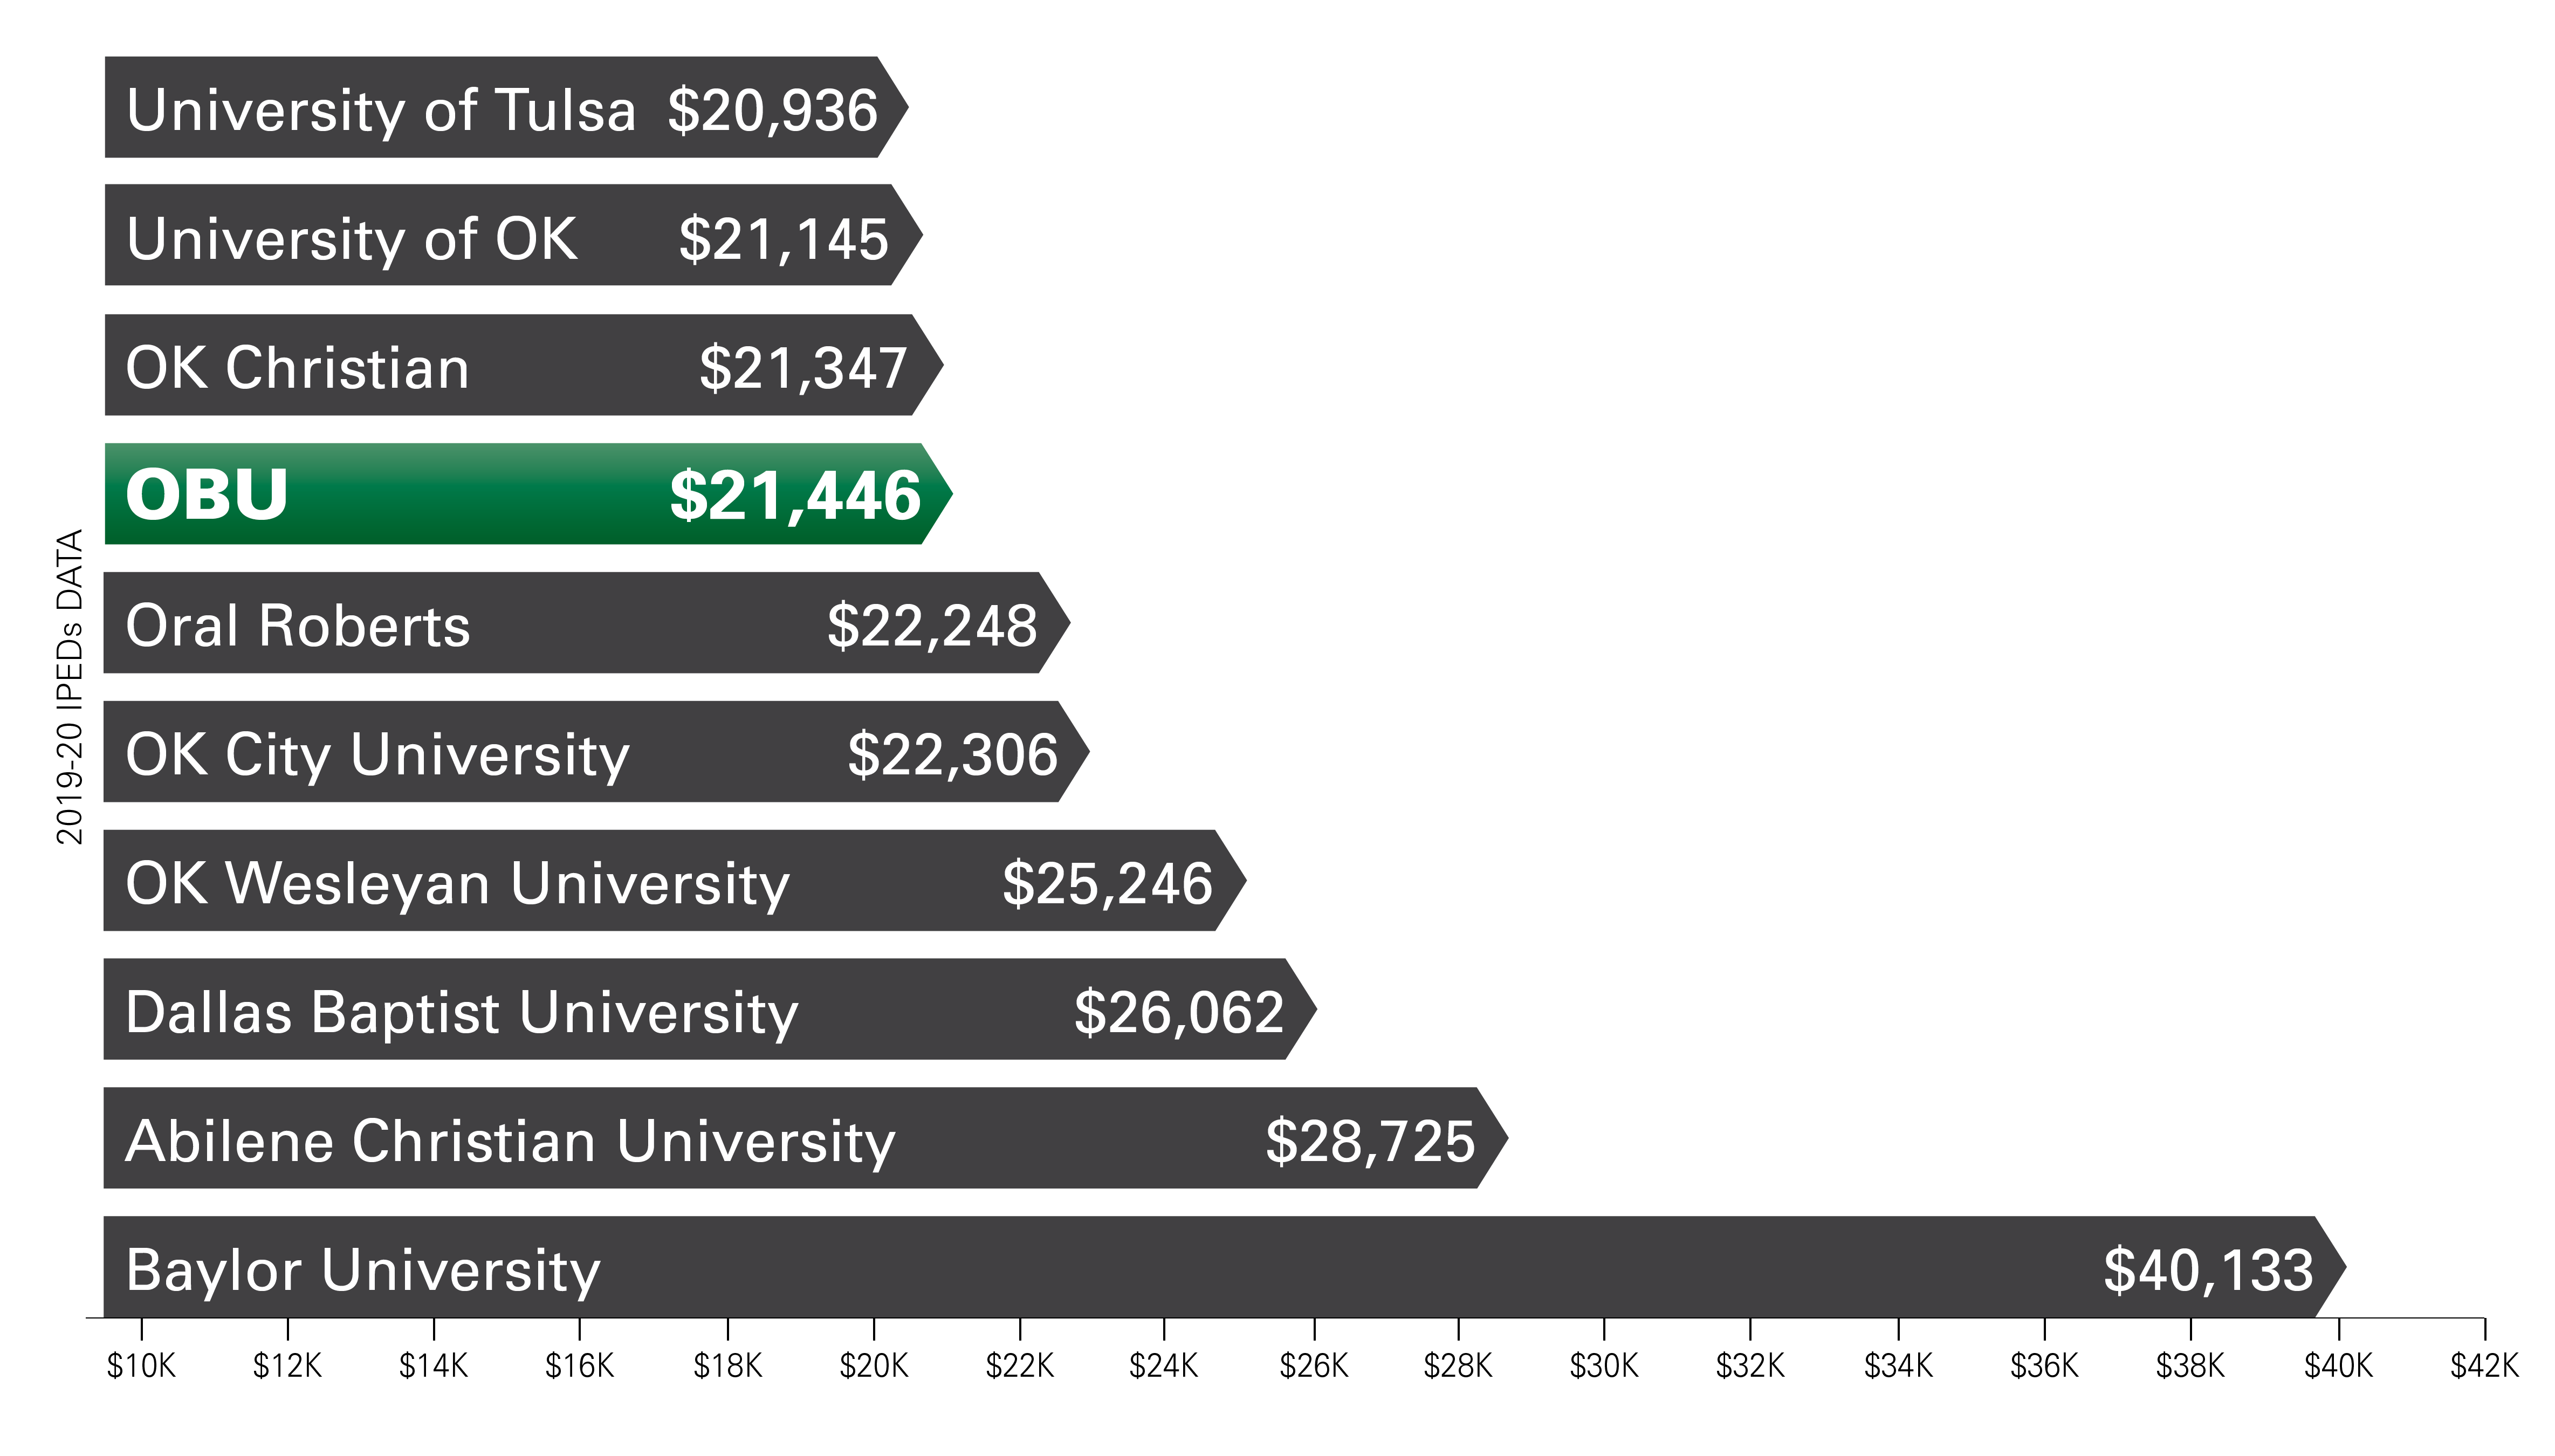 OBU has a comparable net price to some of the largest universities in Oklahoma.